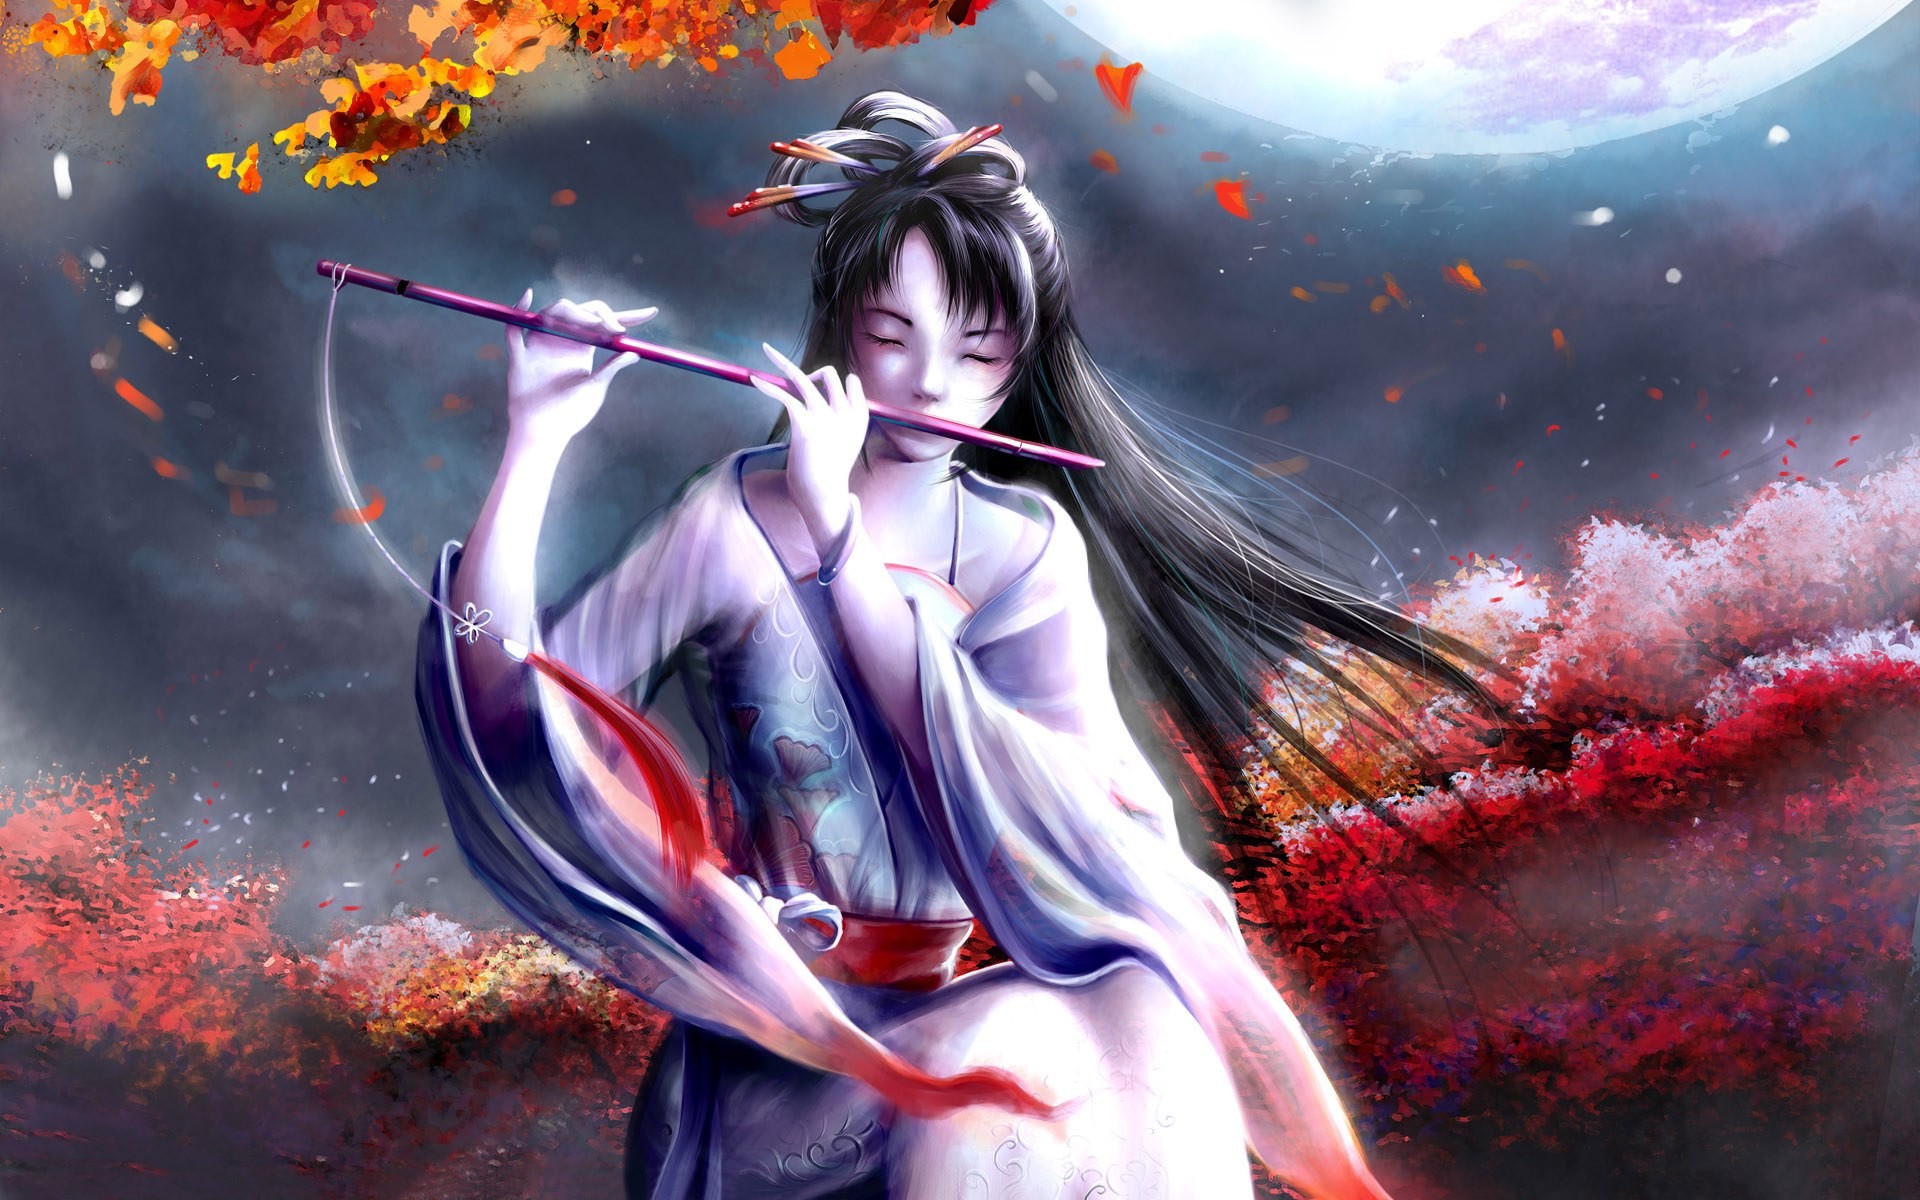 1920x1200 Image: Fantasy girl - Flute wallpapers and stock photos. Â«